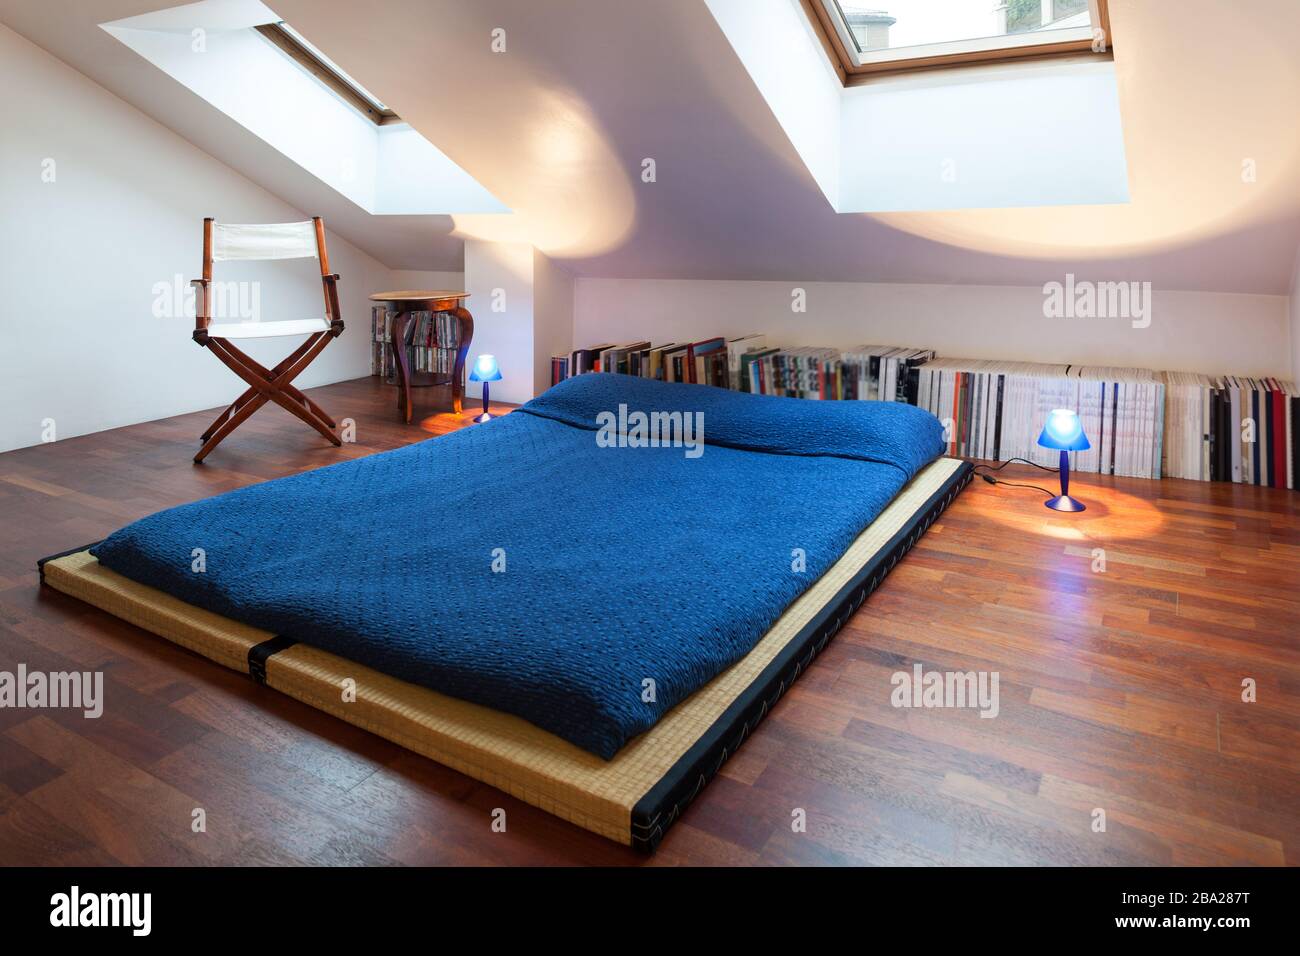 Interior, nice loft, bed with bedspread blue Stock Photo